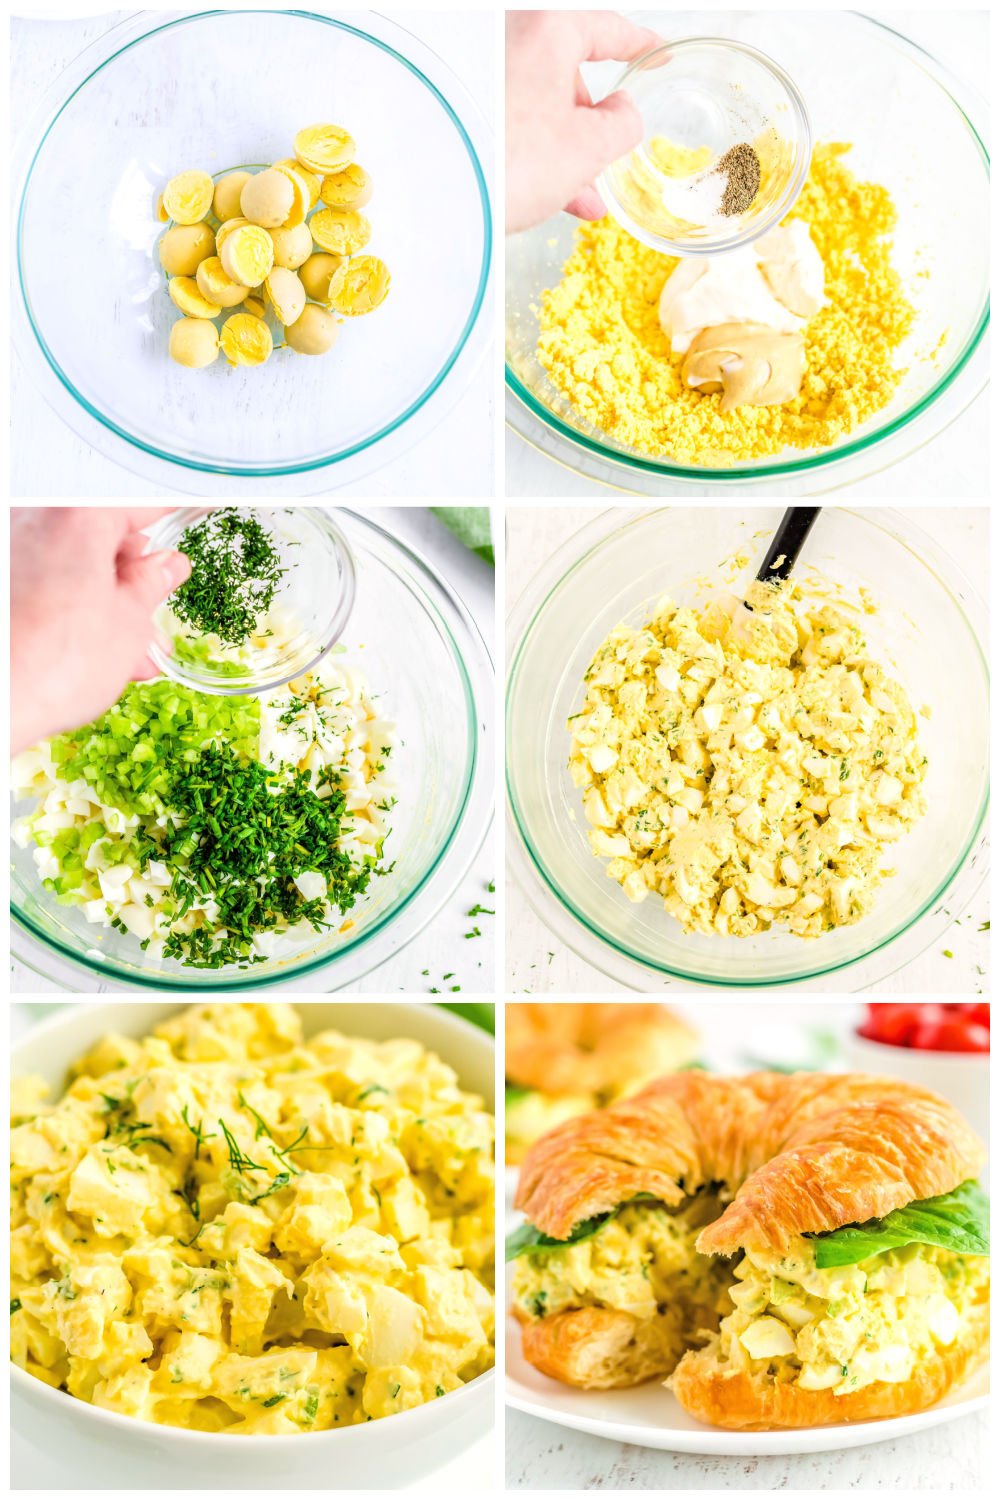 A picture collage showing how to make egg salad. 